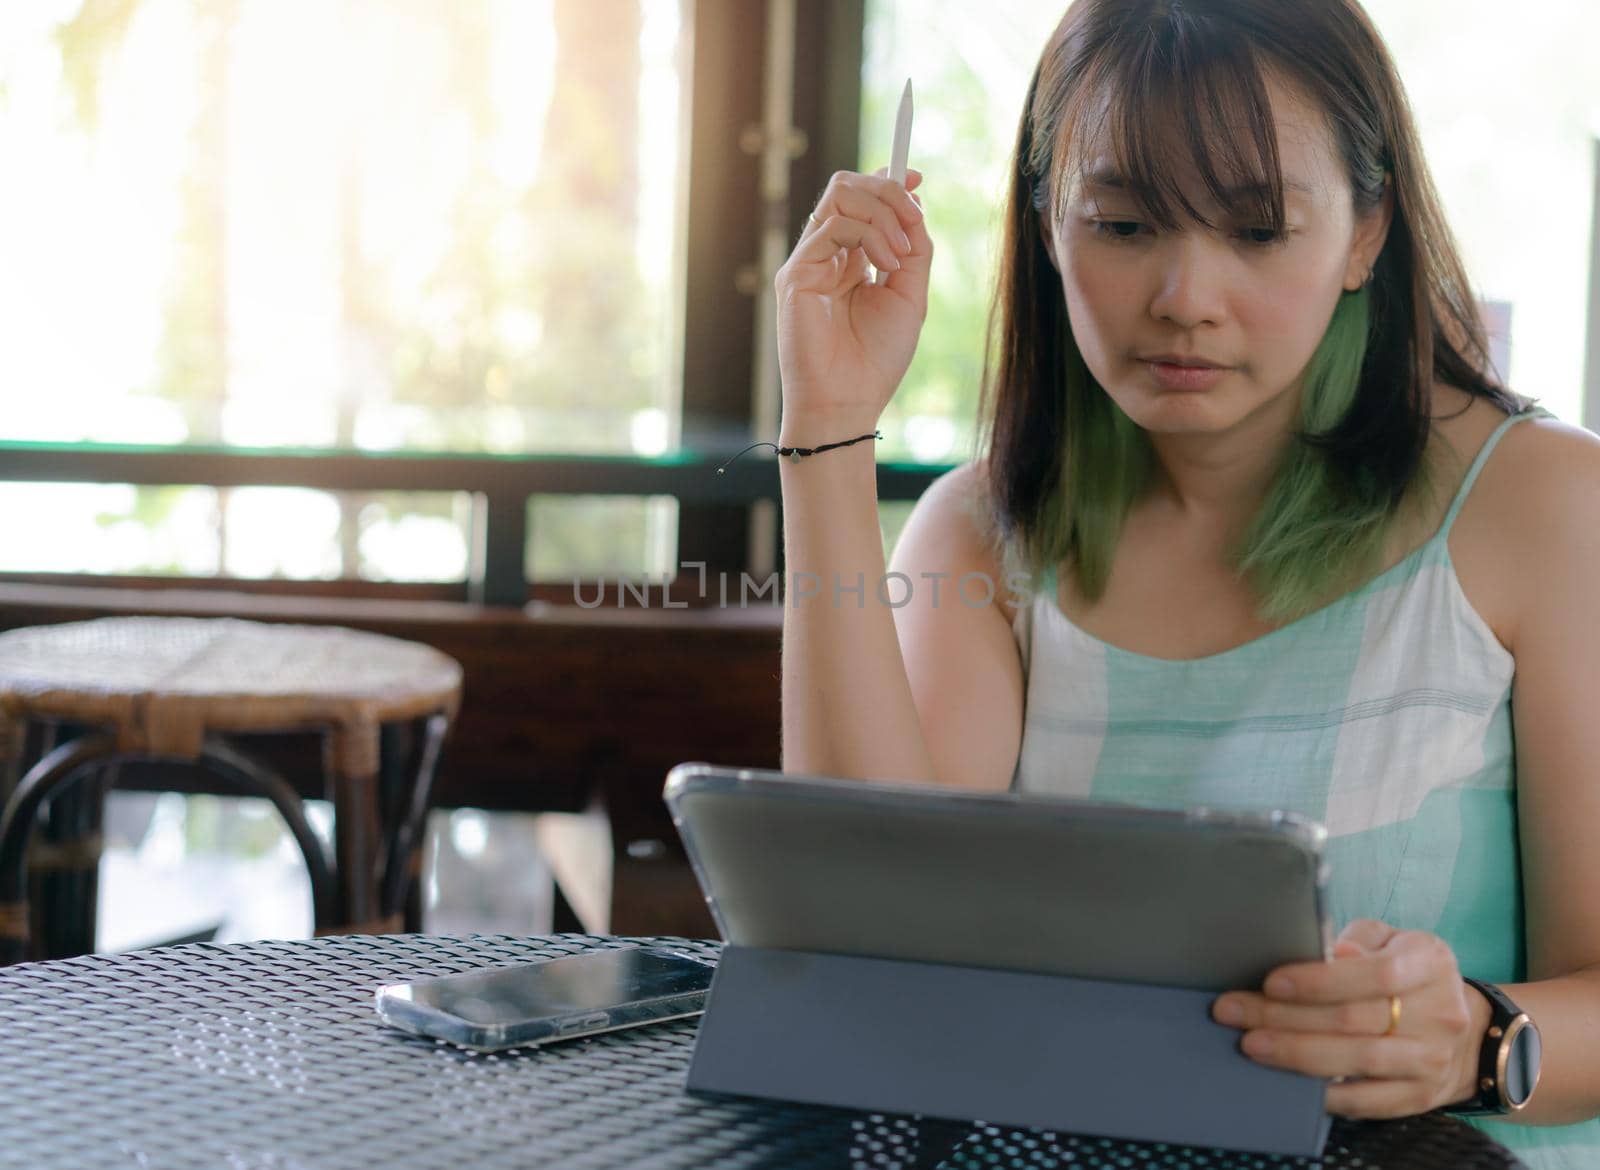 Woman use Tablet for working online business or work at home